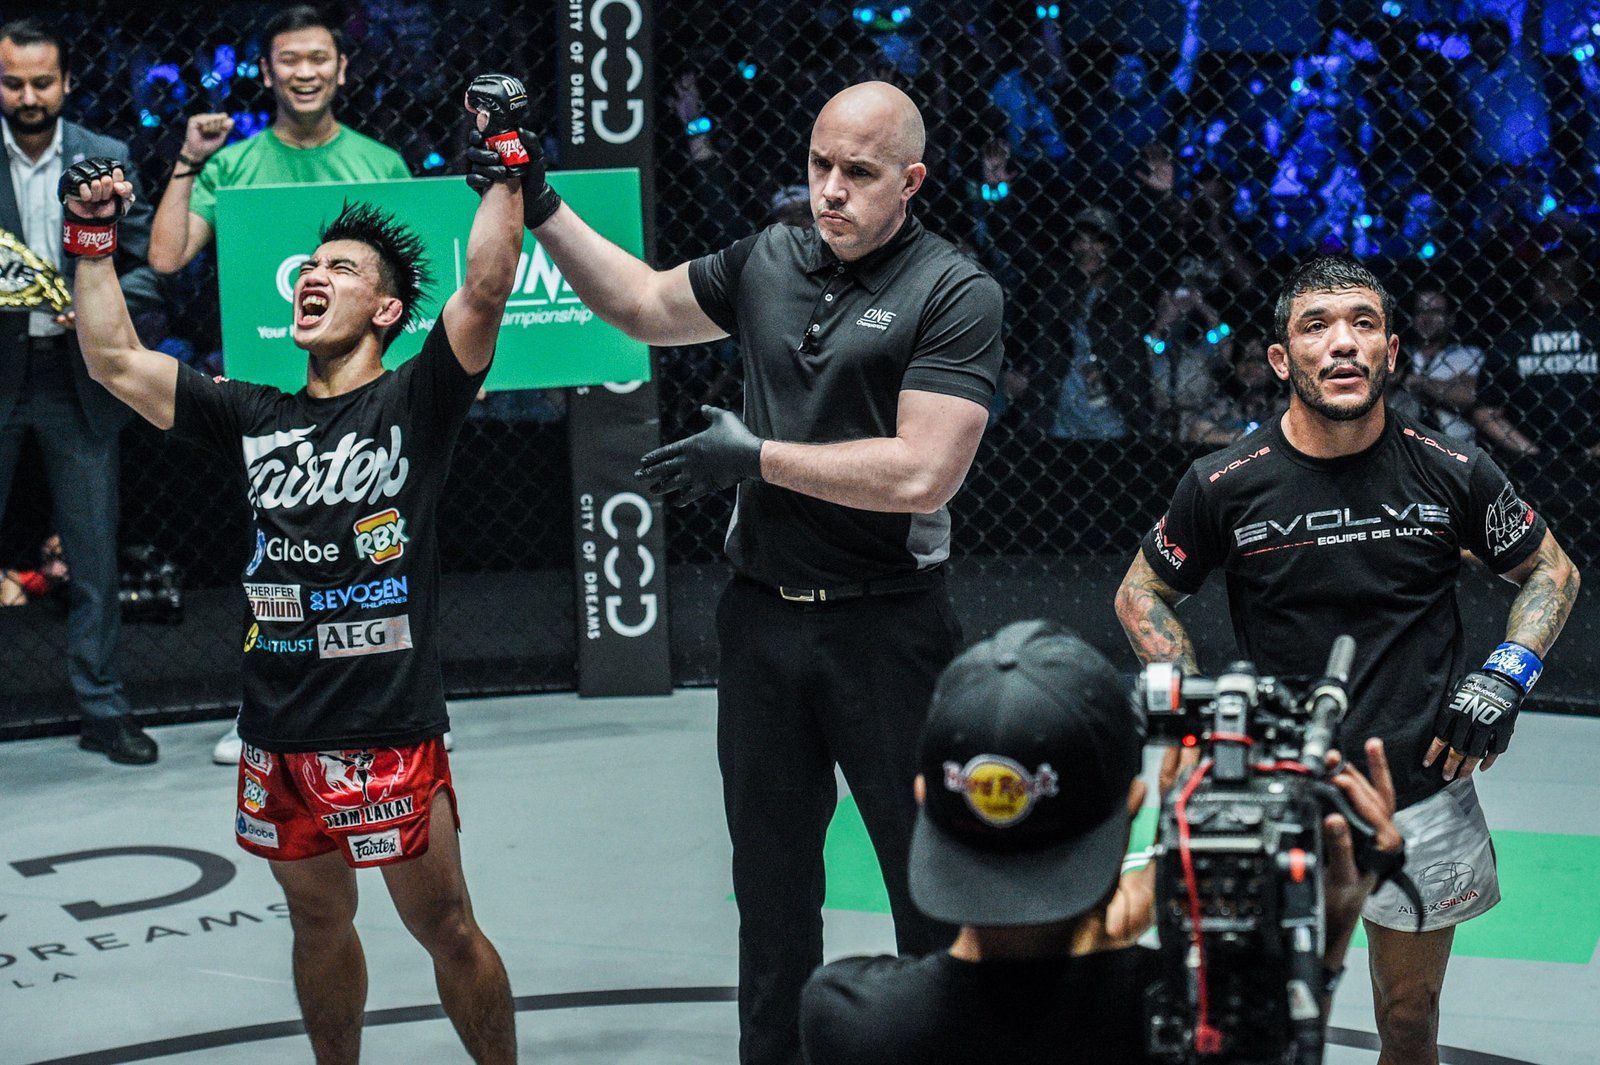 ONE Championship: Pacio Retains Title With Impressive Performance Against ‘Little Rock’